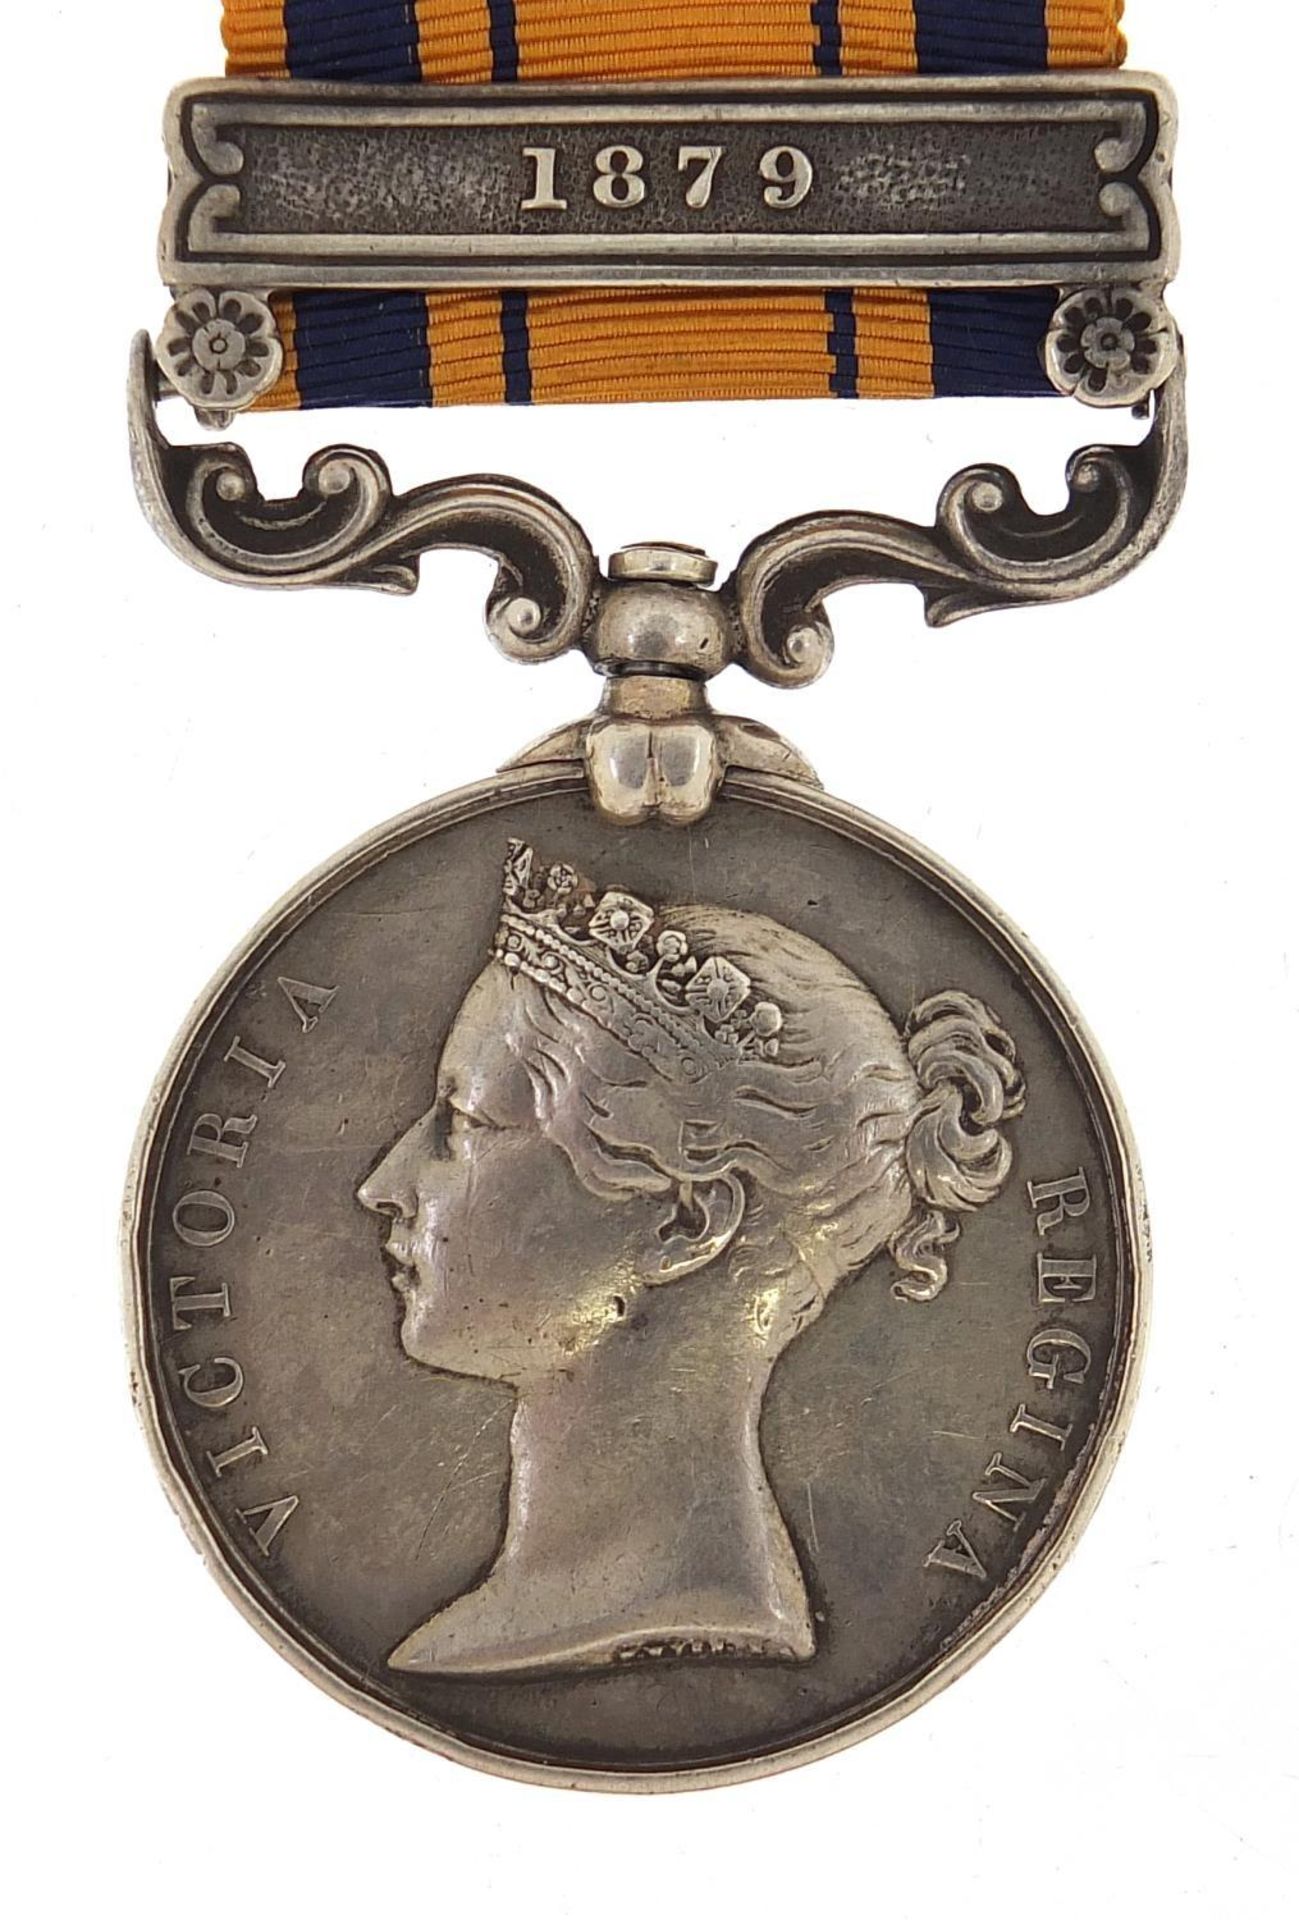 Victorian British military South Africa medal with 1879 bar awarded to 2313.PTE.J.DALE.2/4TH.FOOT